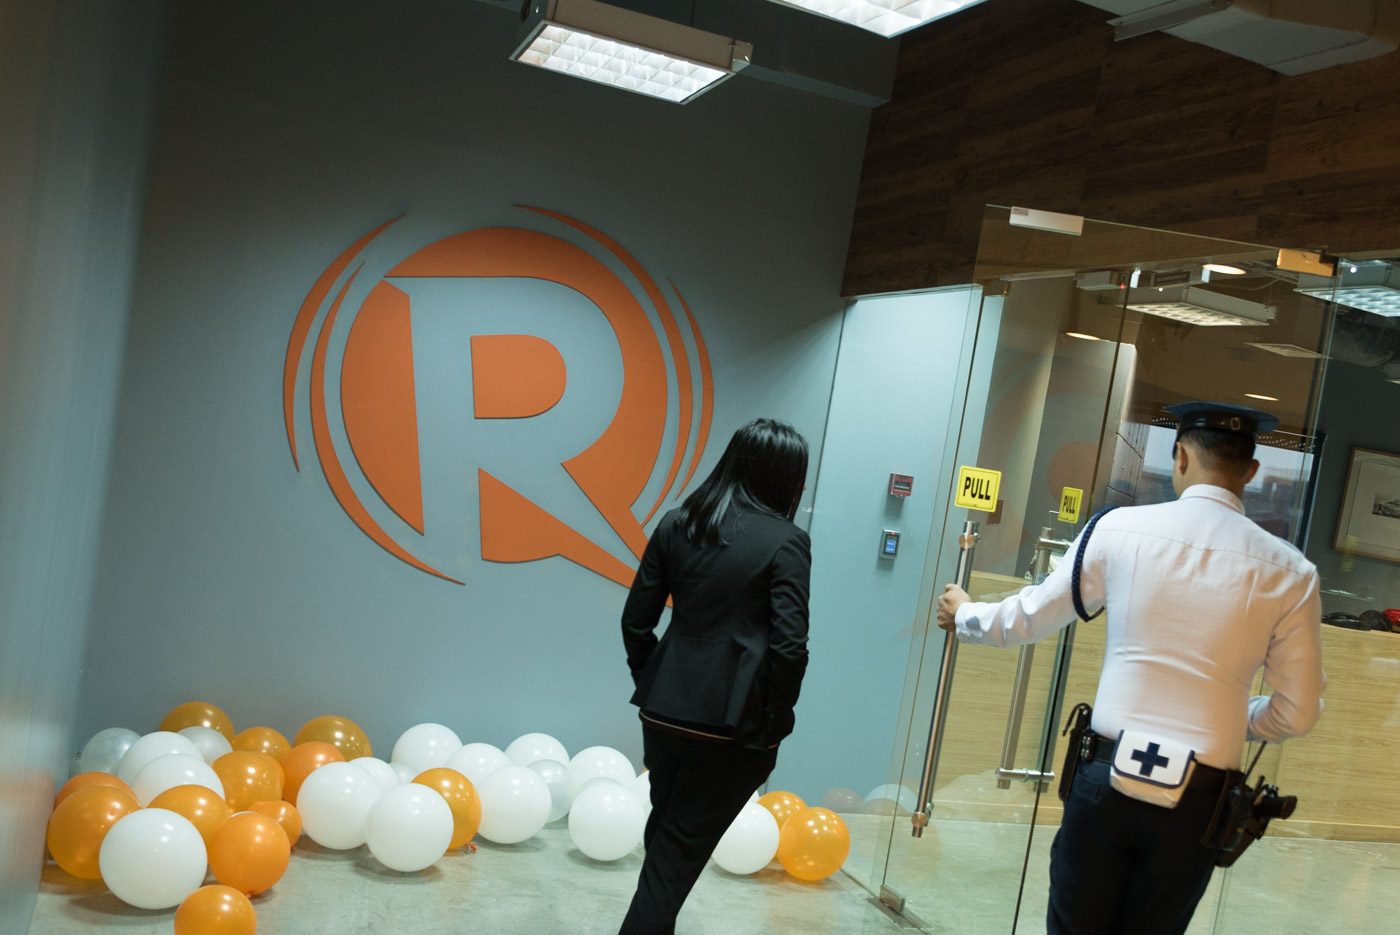 If there was a violation, Rappler not given time to cure it – lawyer